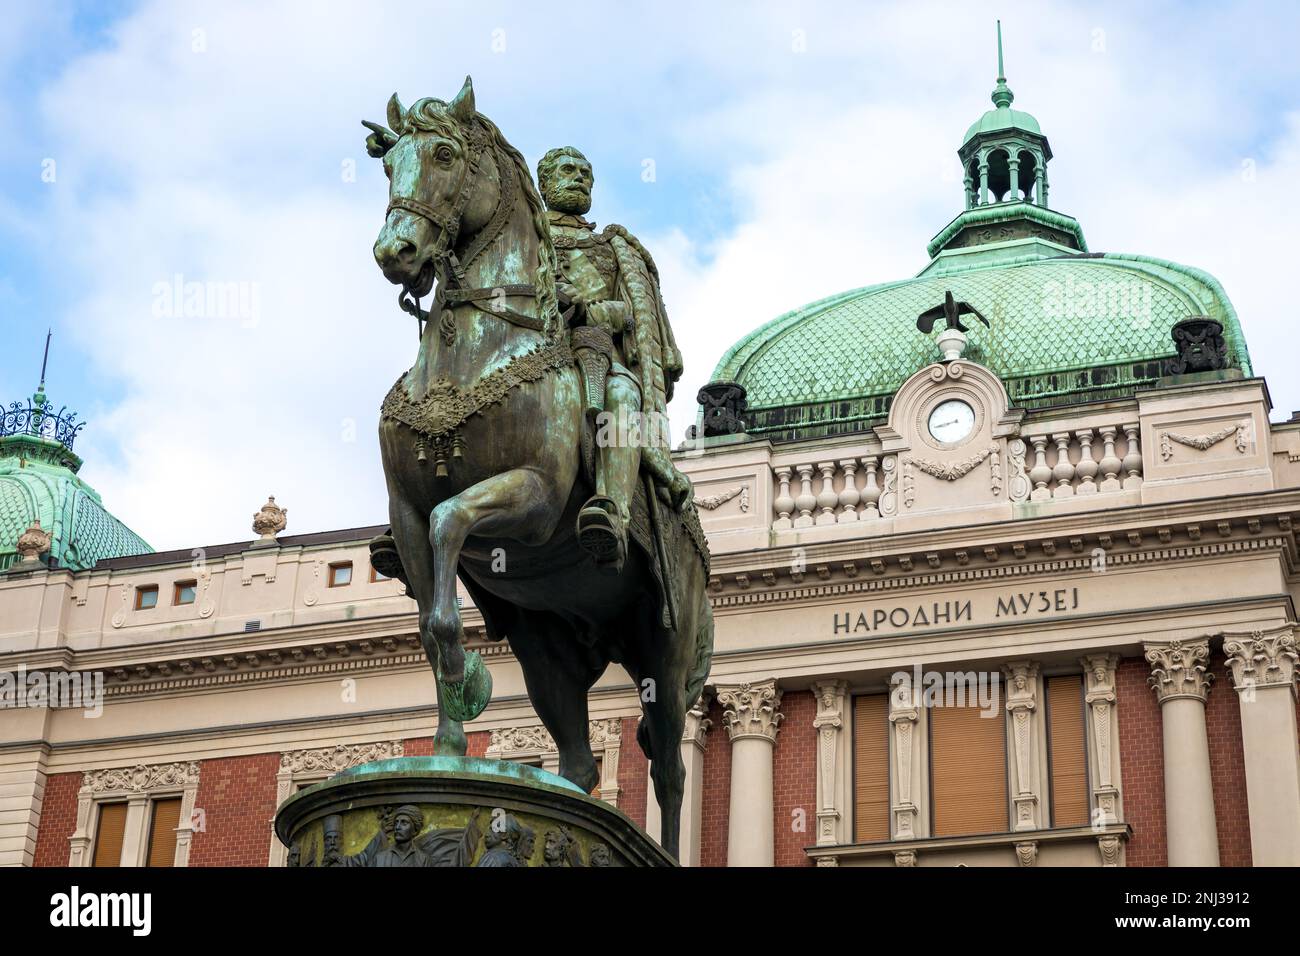 The Republic Square (Trg Republike in Serbian) with old Baroque style buildings, the statue of Prince Michael and the National Museum. Stock Photo